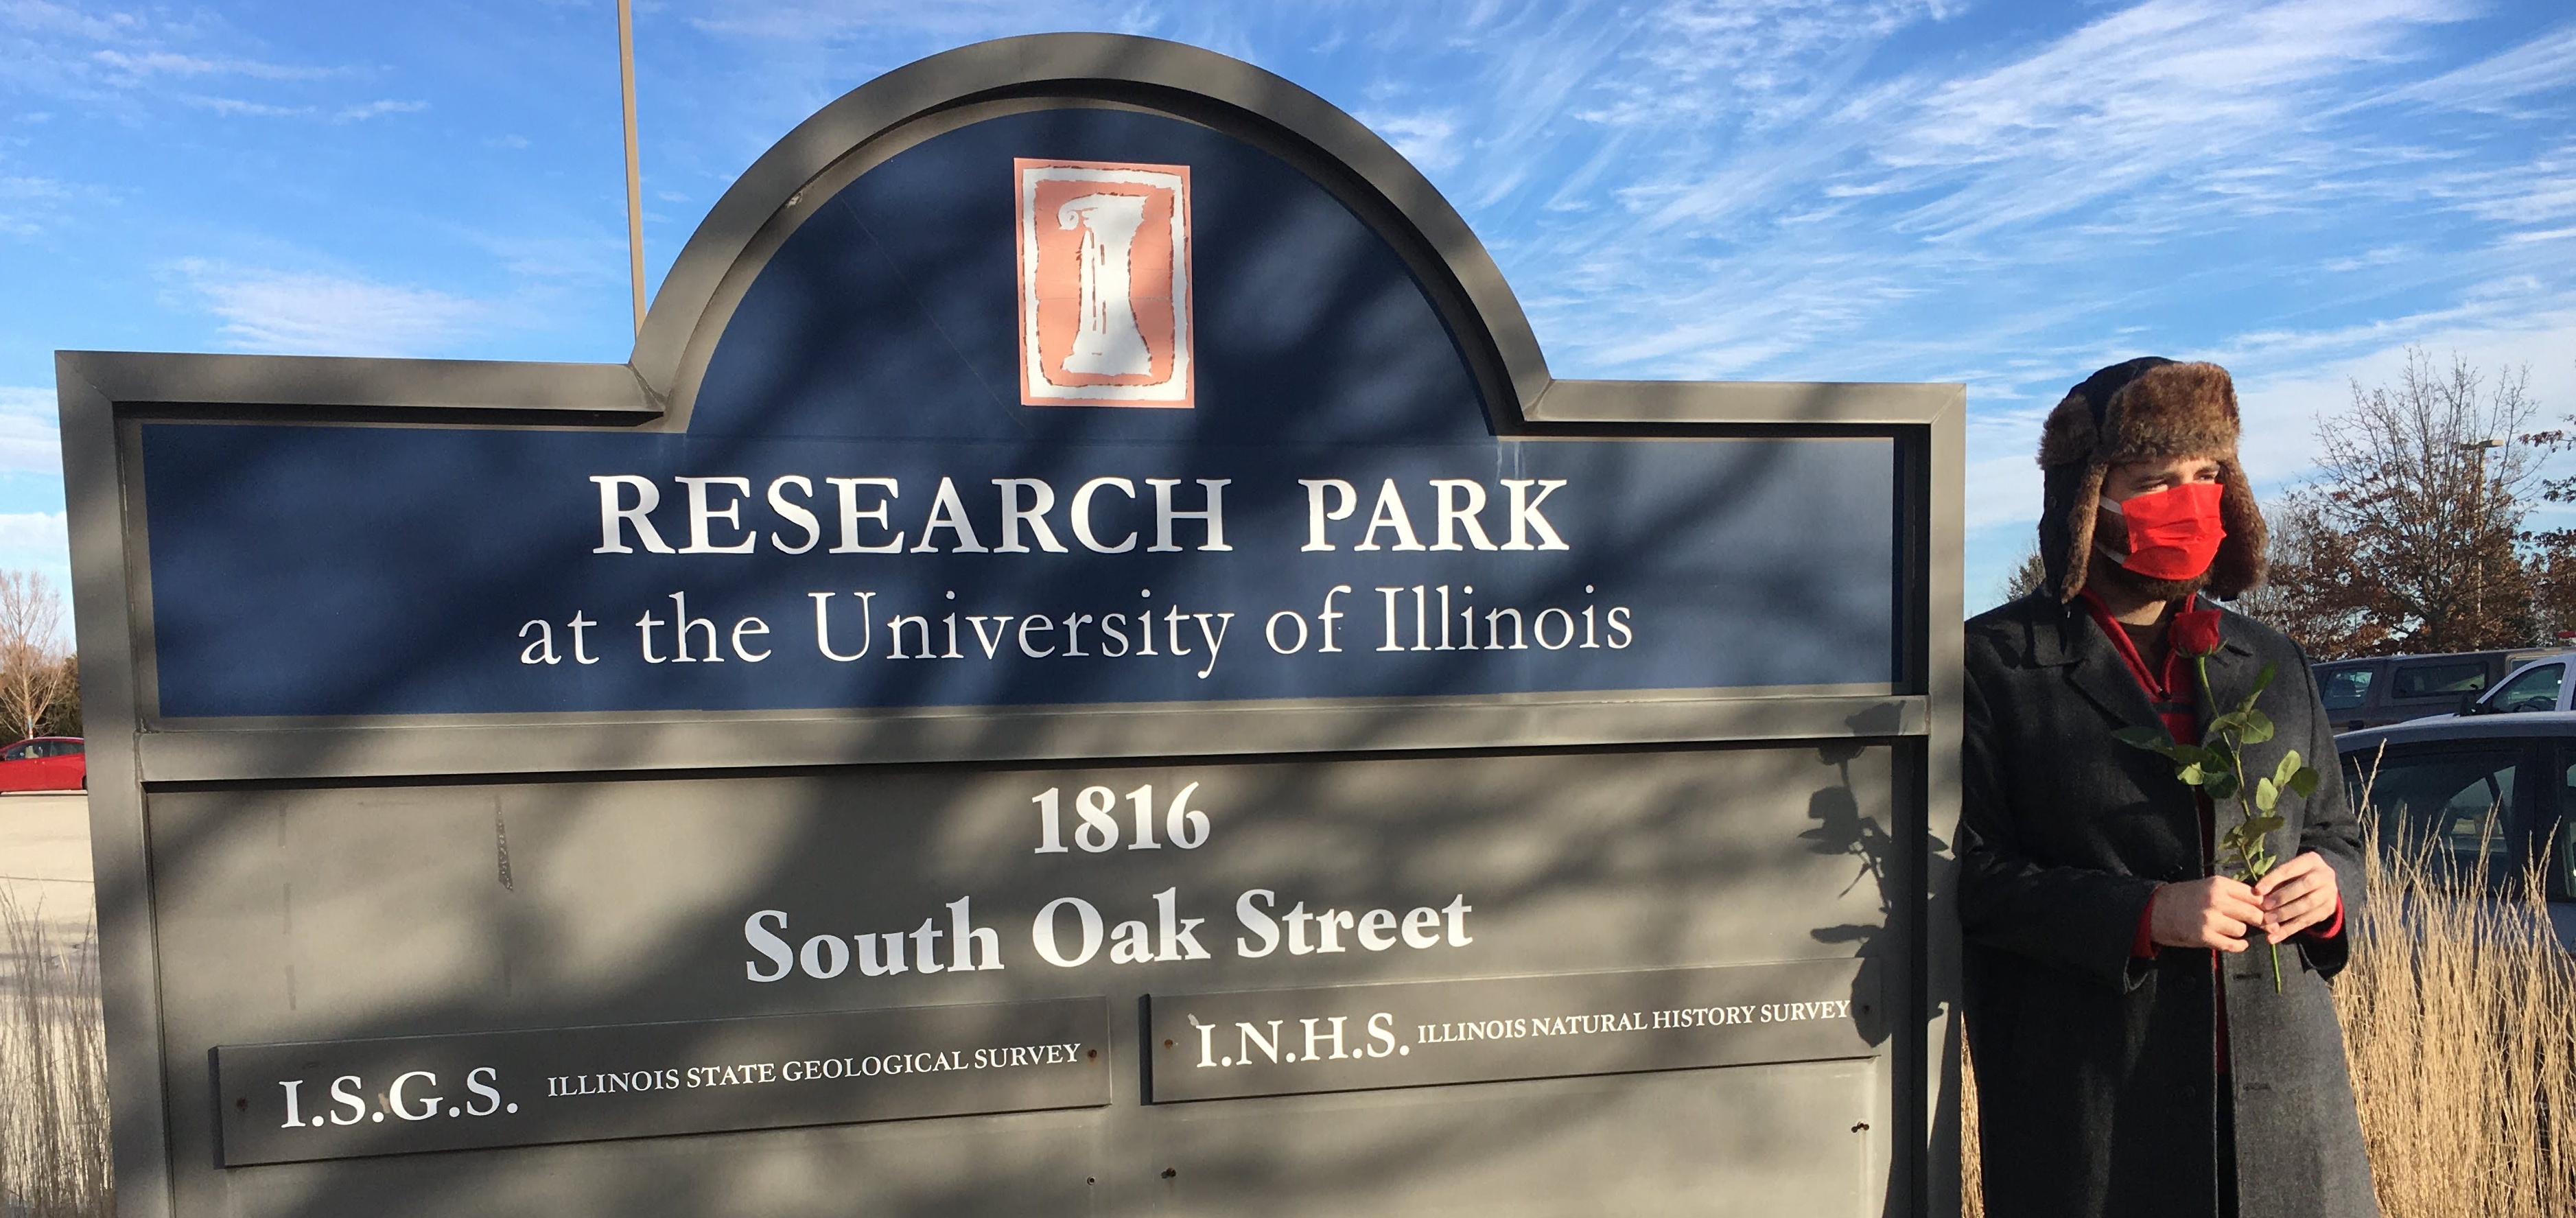 Several secluded spots in Research Park for your scenic socially-distanced Valentine’s rendezvous